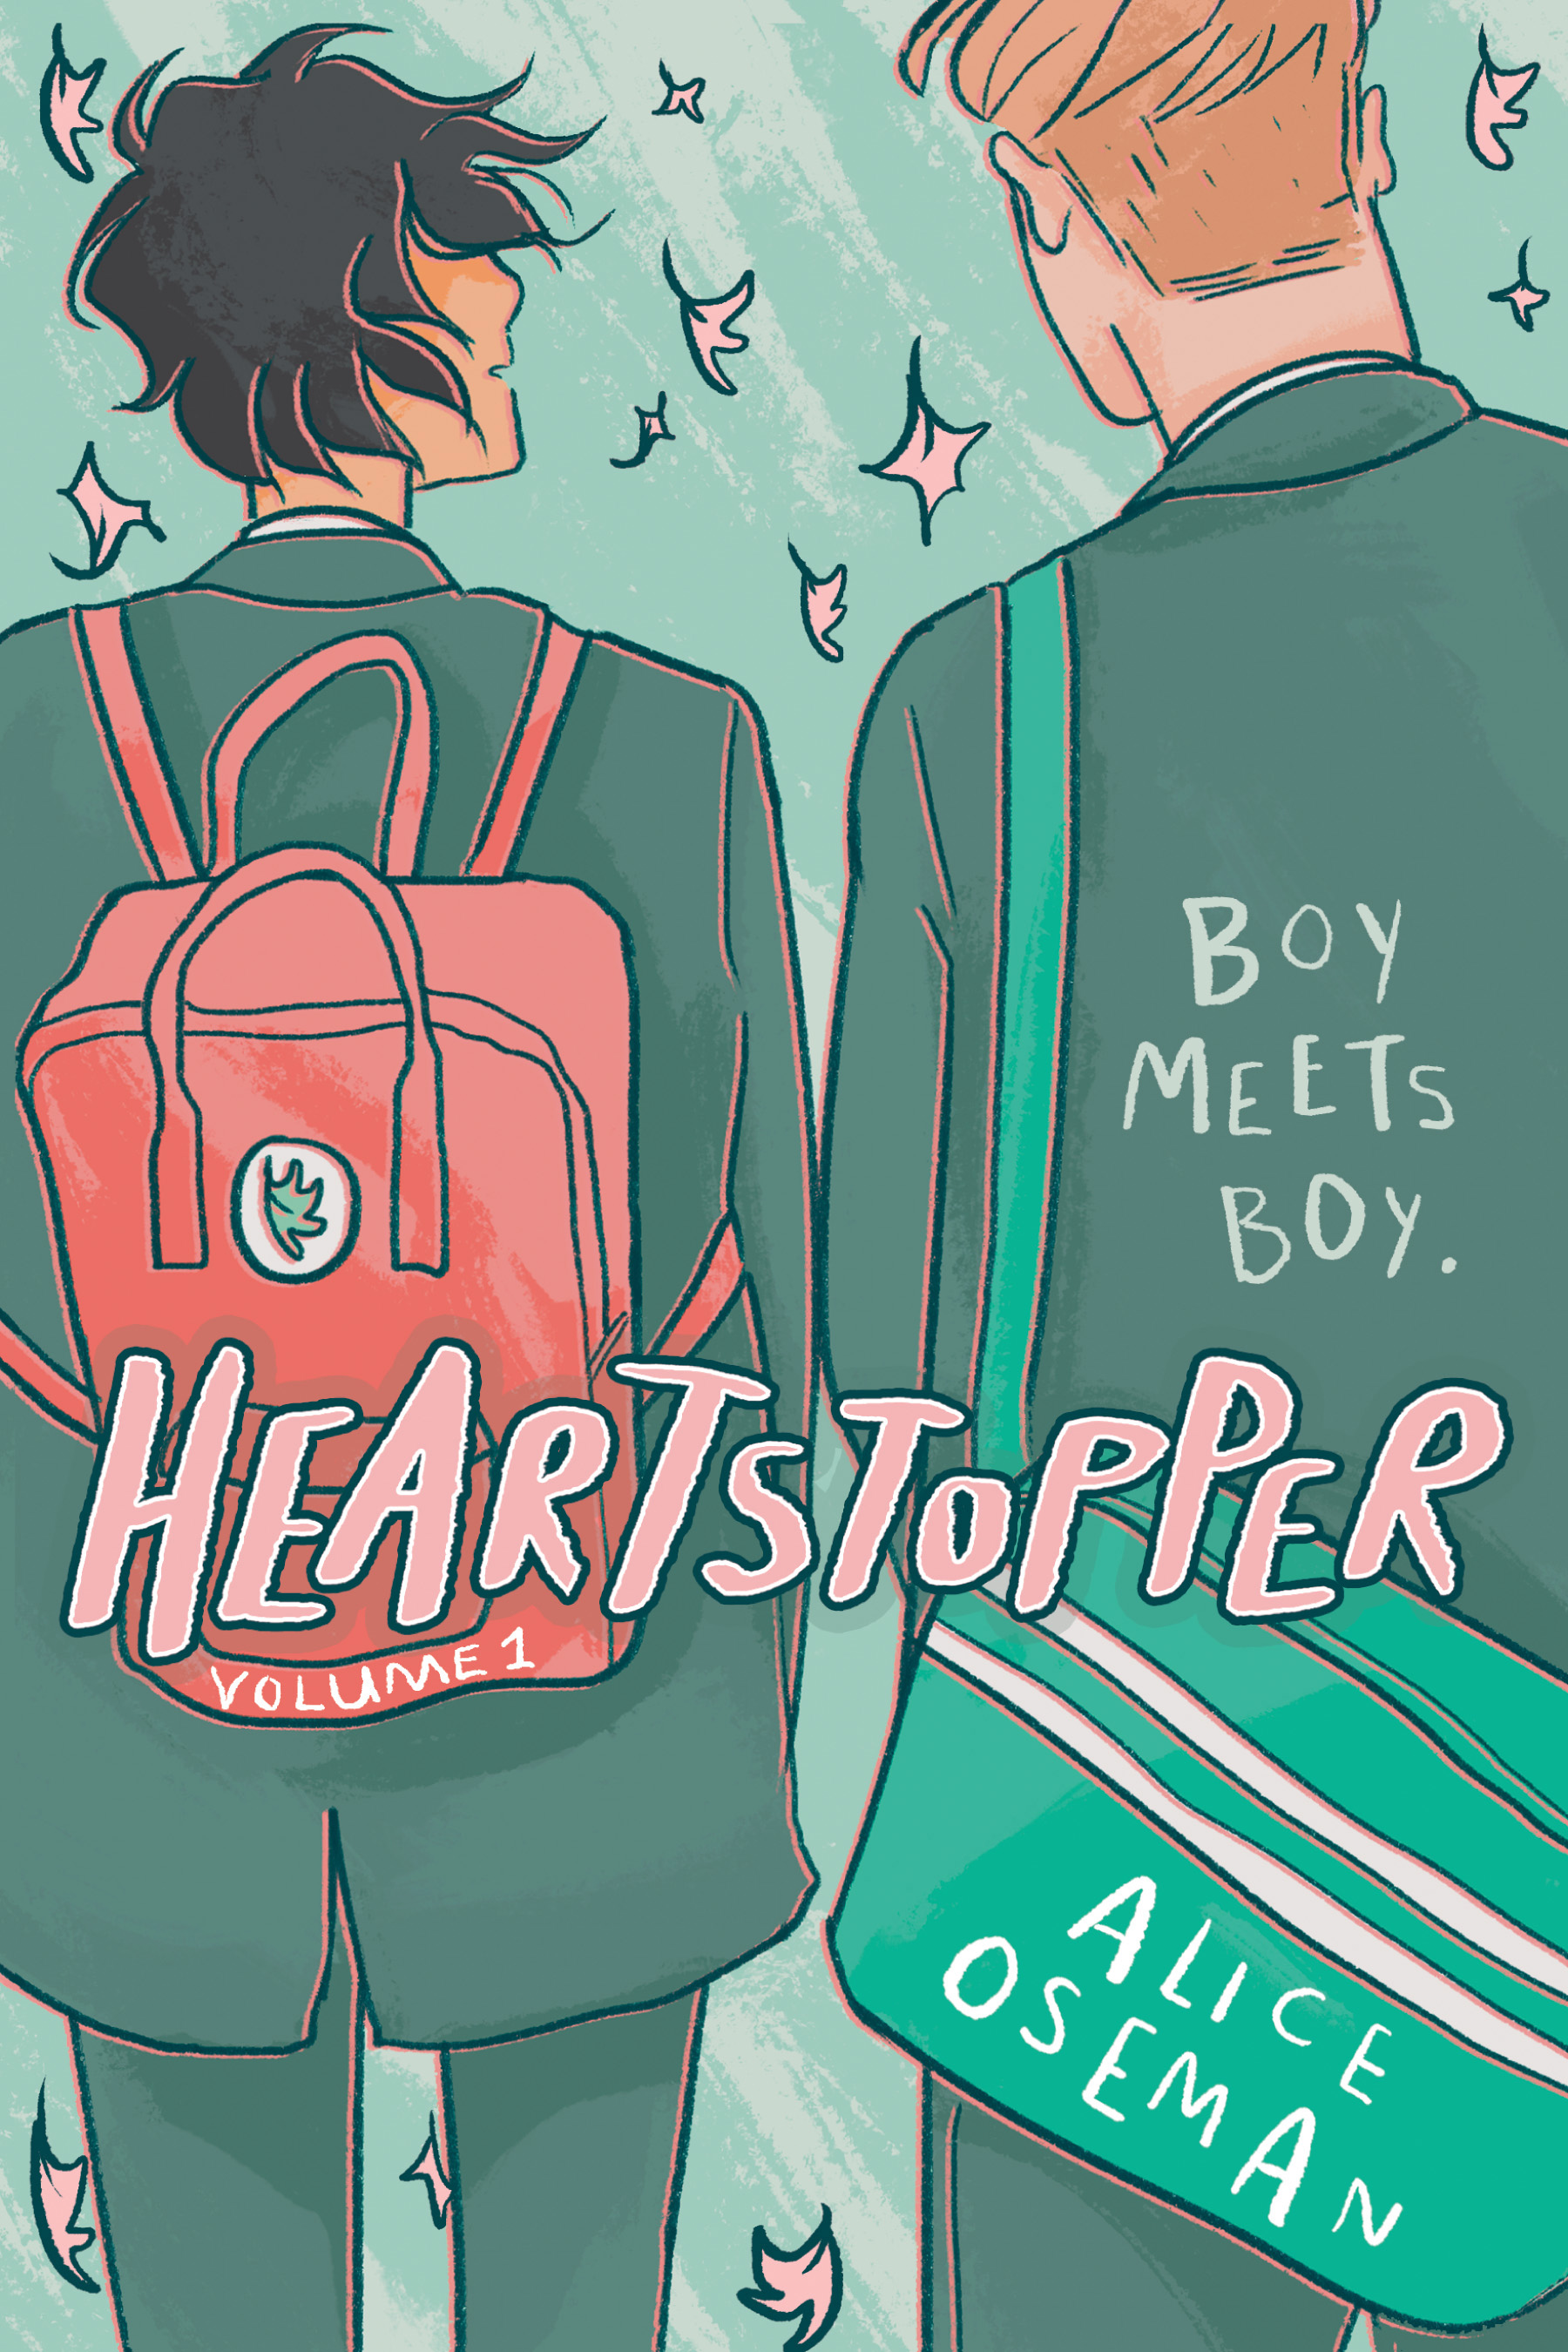 Heartstopper Volume 1 cover; two young men with backpacks in uniform back to